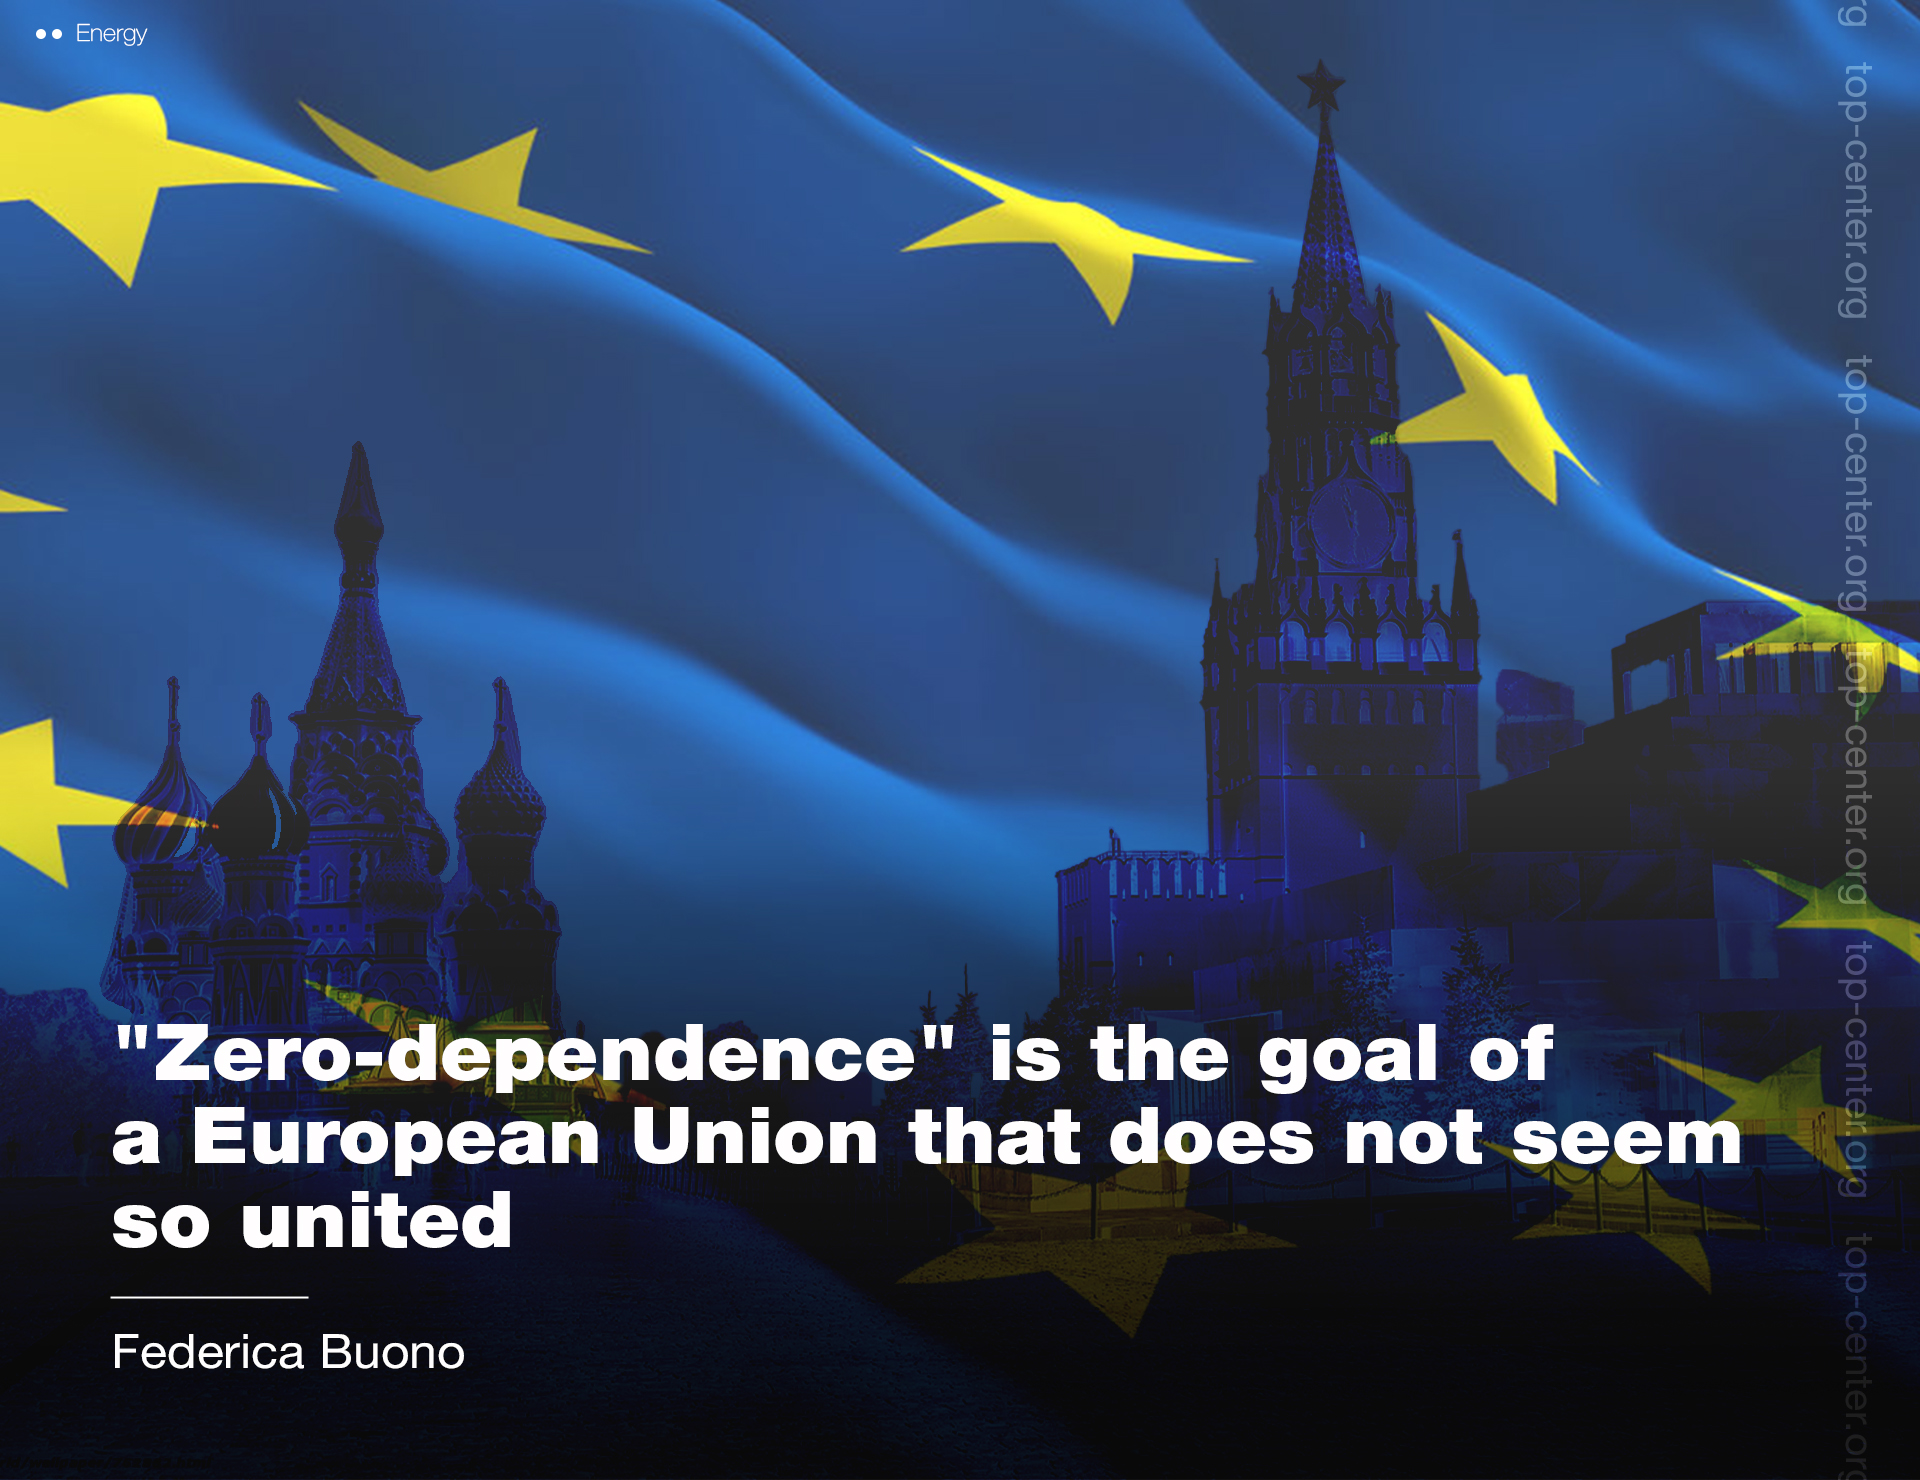 "Zero-dependence" is the goal of a European Union that does not seem so united